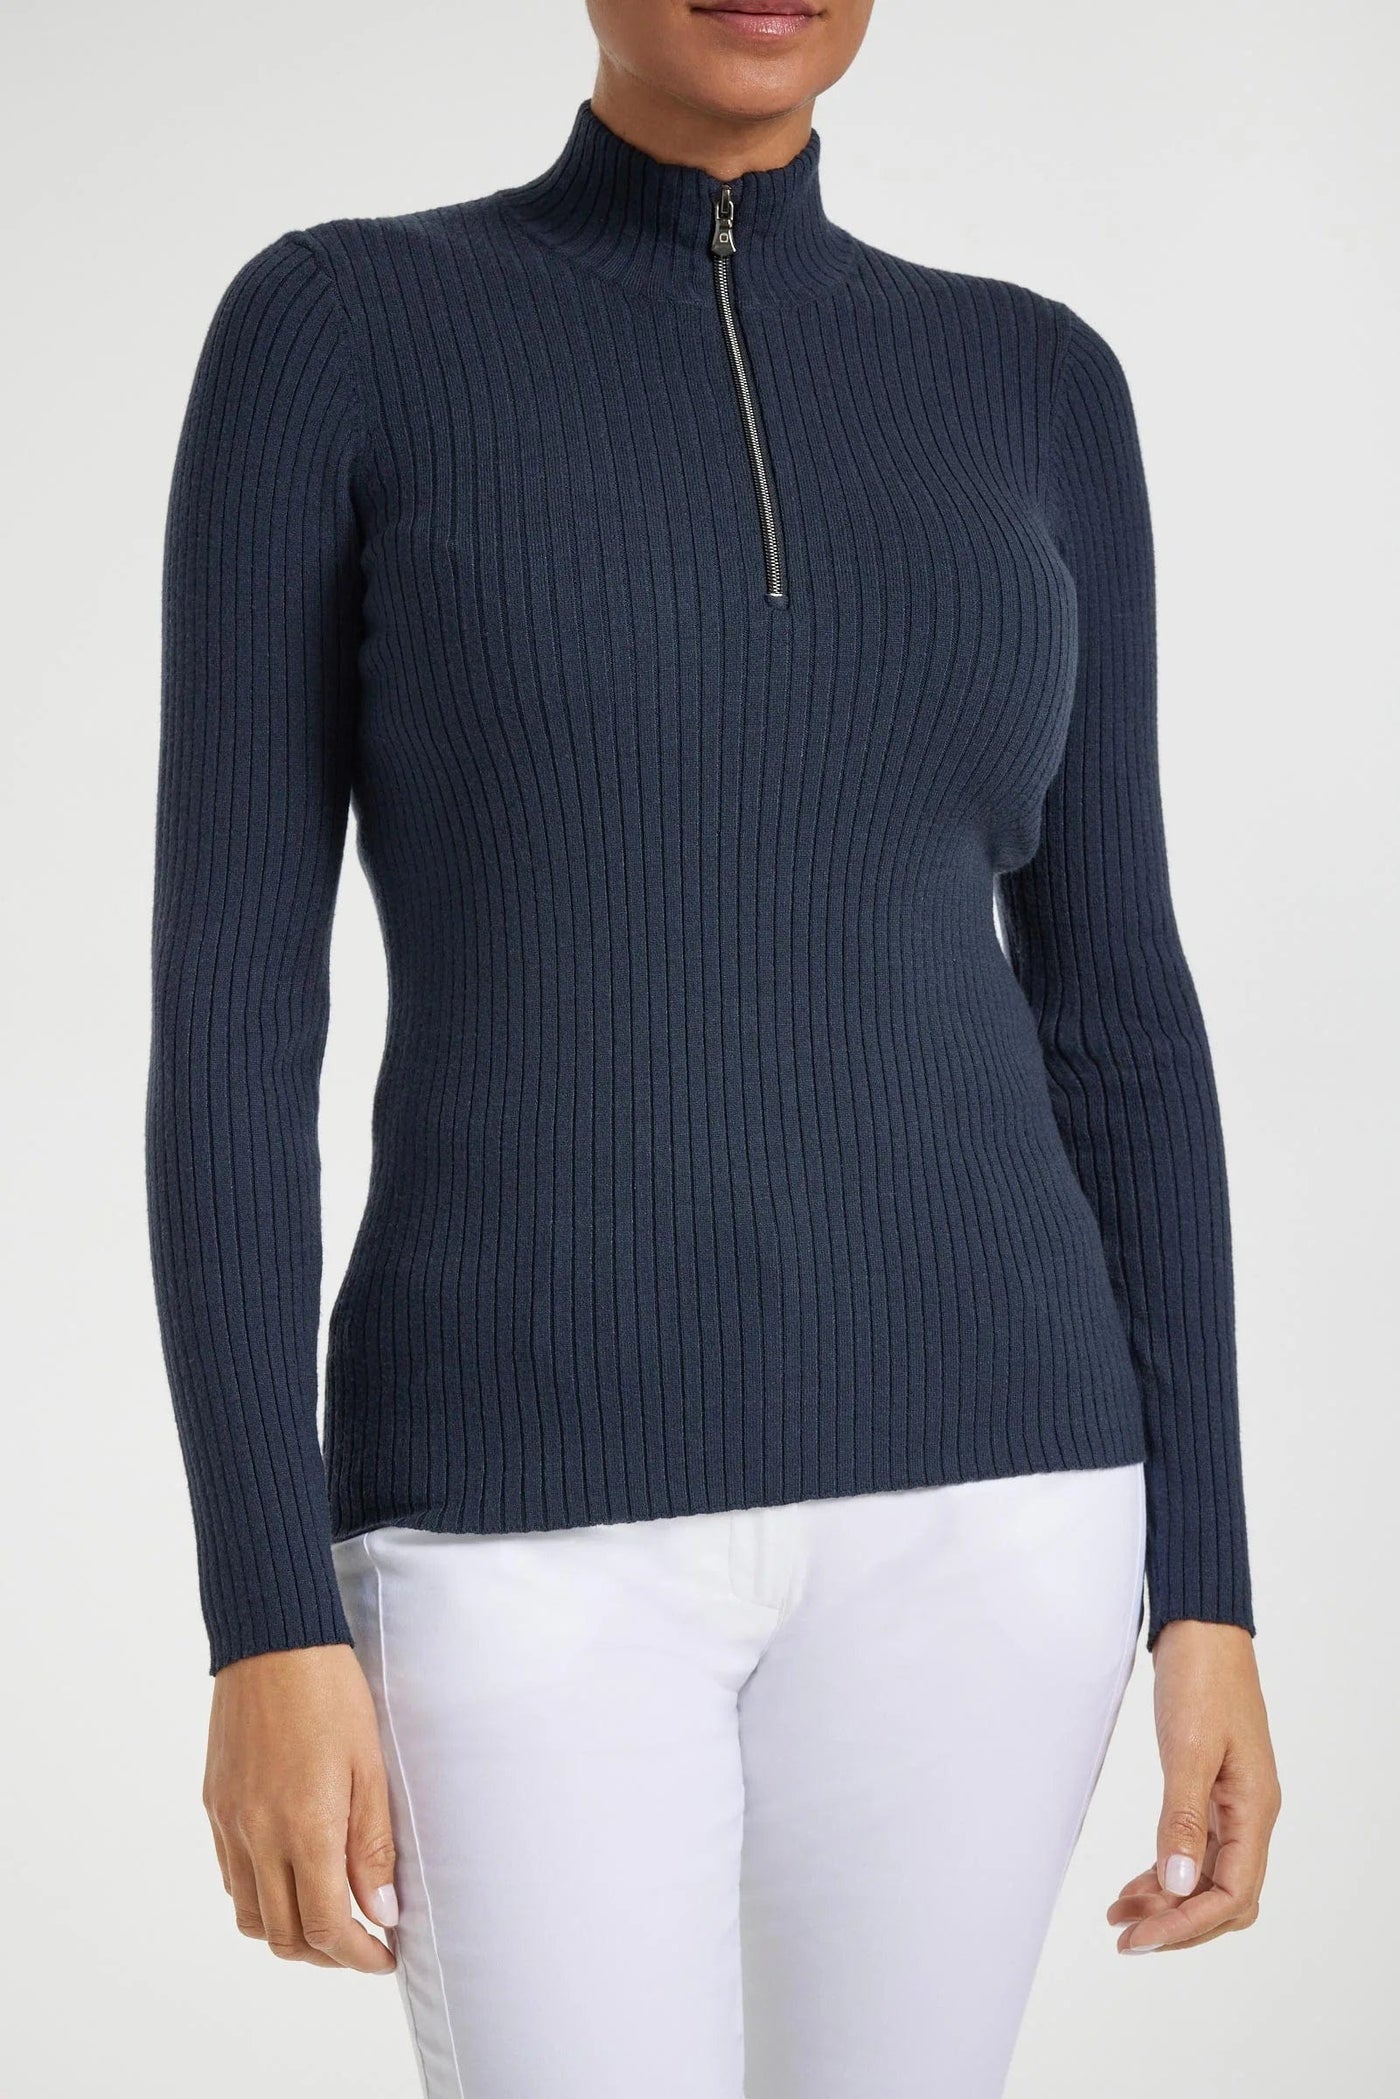 Stacey Ribbed Long Sleeve Sweater in Navy by Anatomie - side view